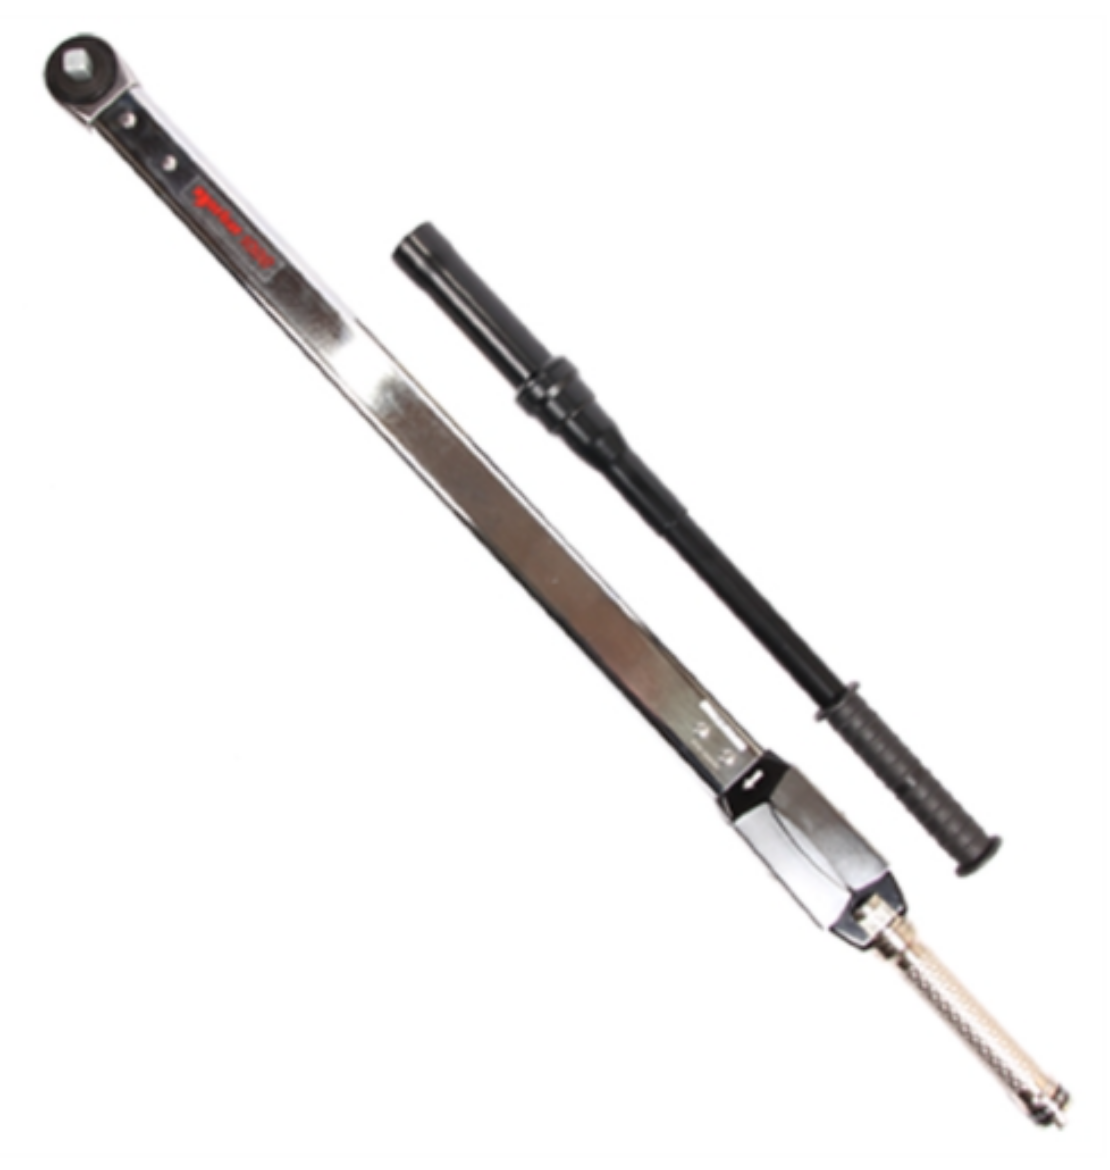 Picture of Torque Wrench 3/4"Dr Adj.Ratchet (Dual Scale) Mushroom Head - 300-1000Nm / 220-750 Ft.lb - NORBAR PRO 1000